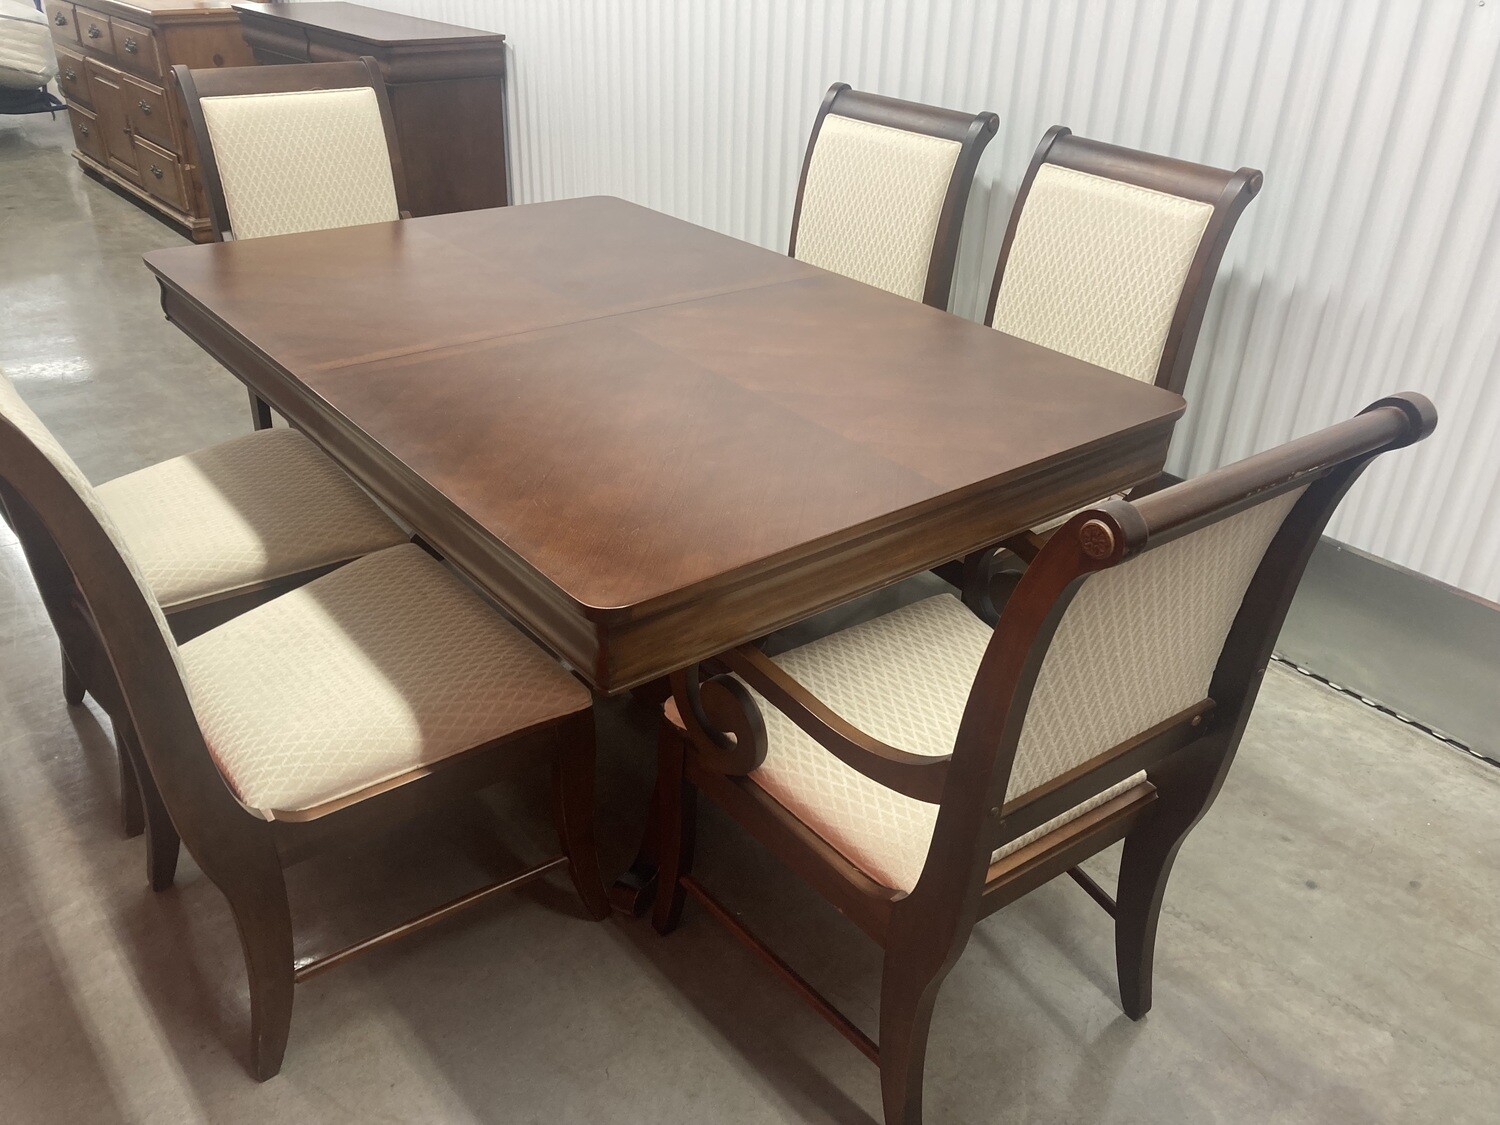 Broyhill Dining Table, 6 chairs, double pedestal #2214